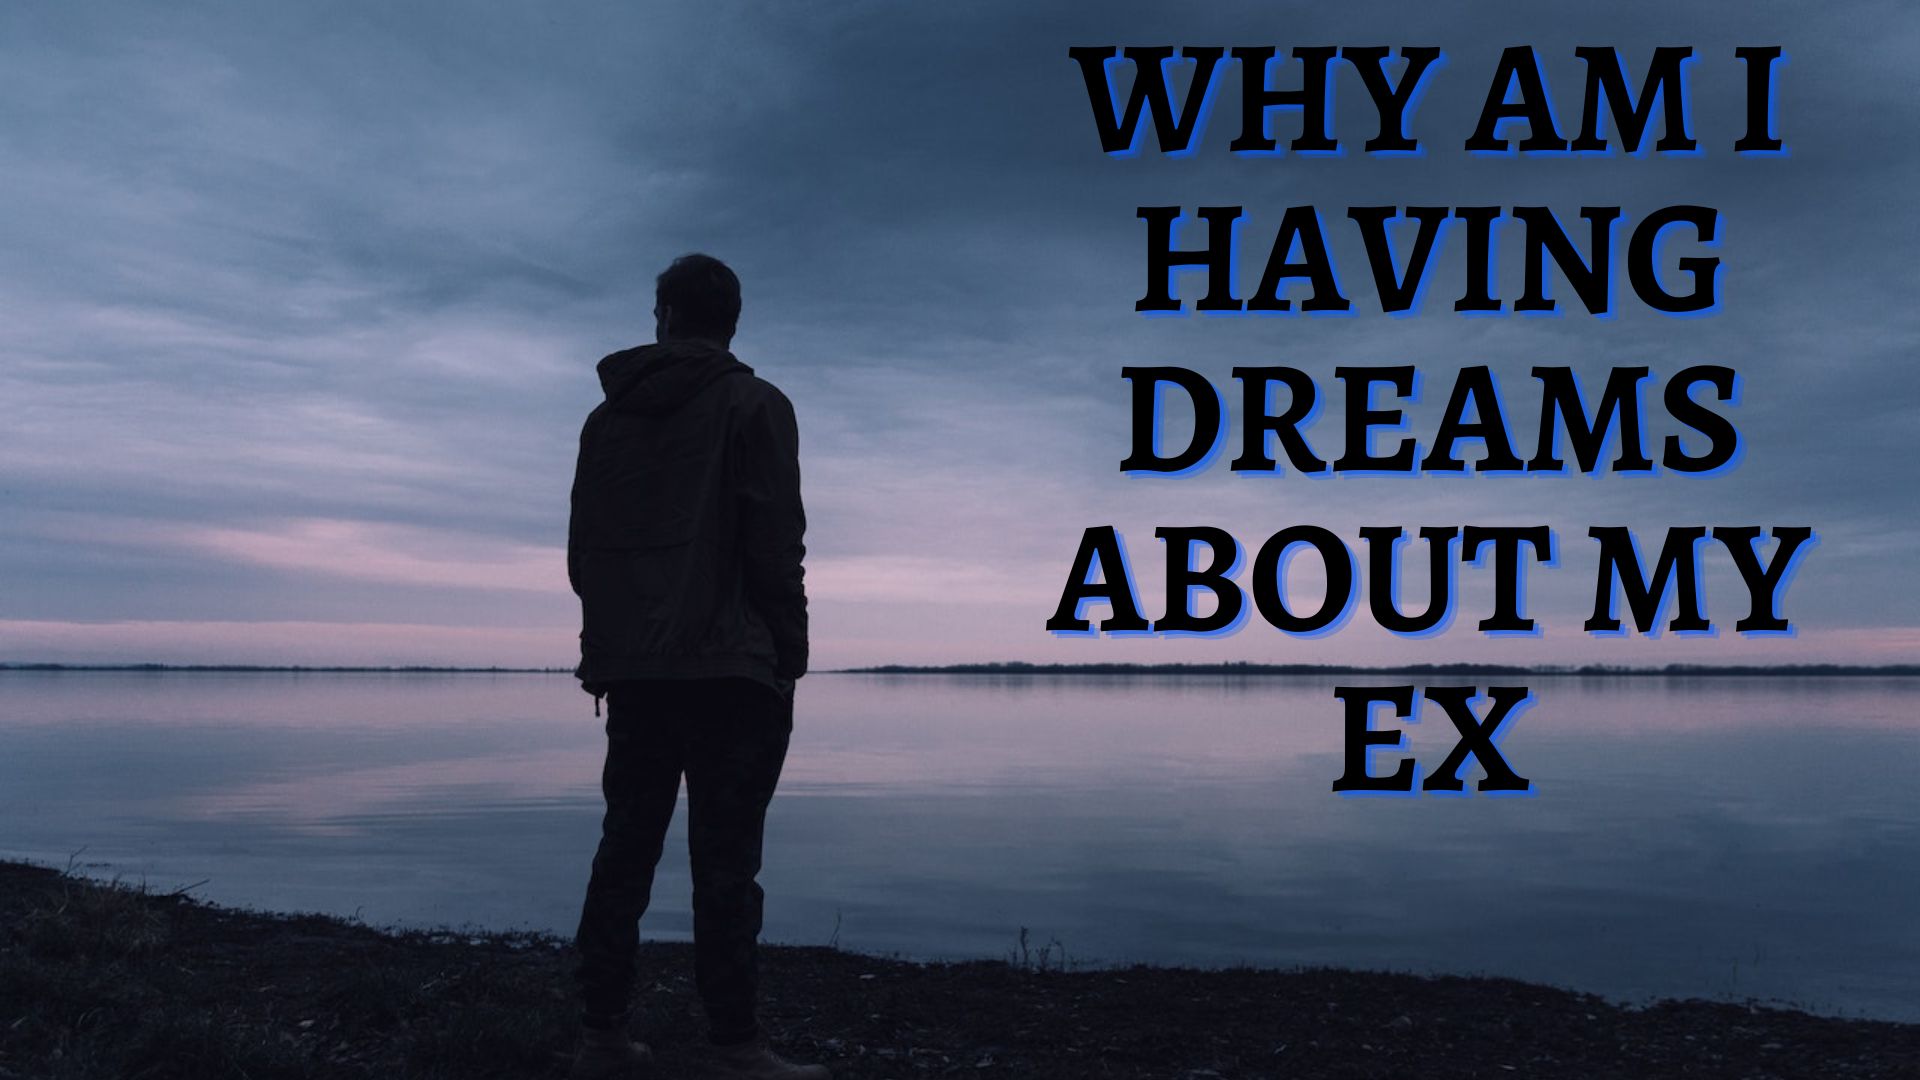 Why Am I Having Dreams About My Ex?